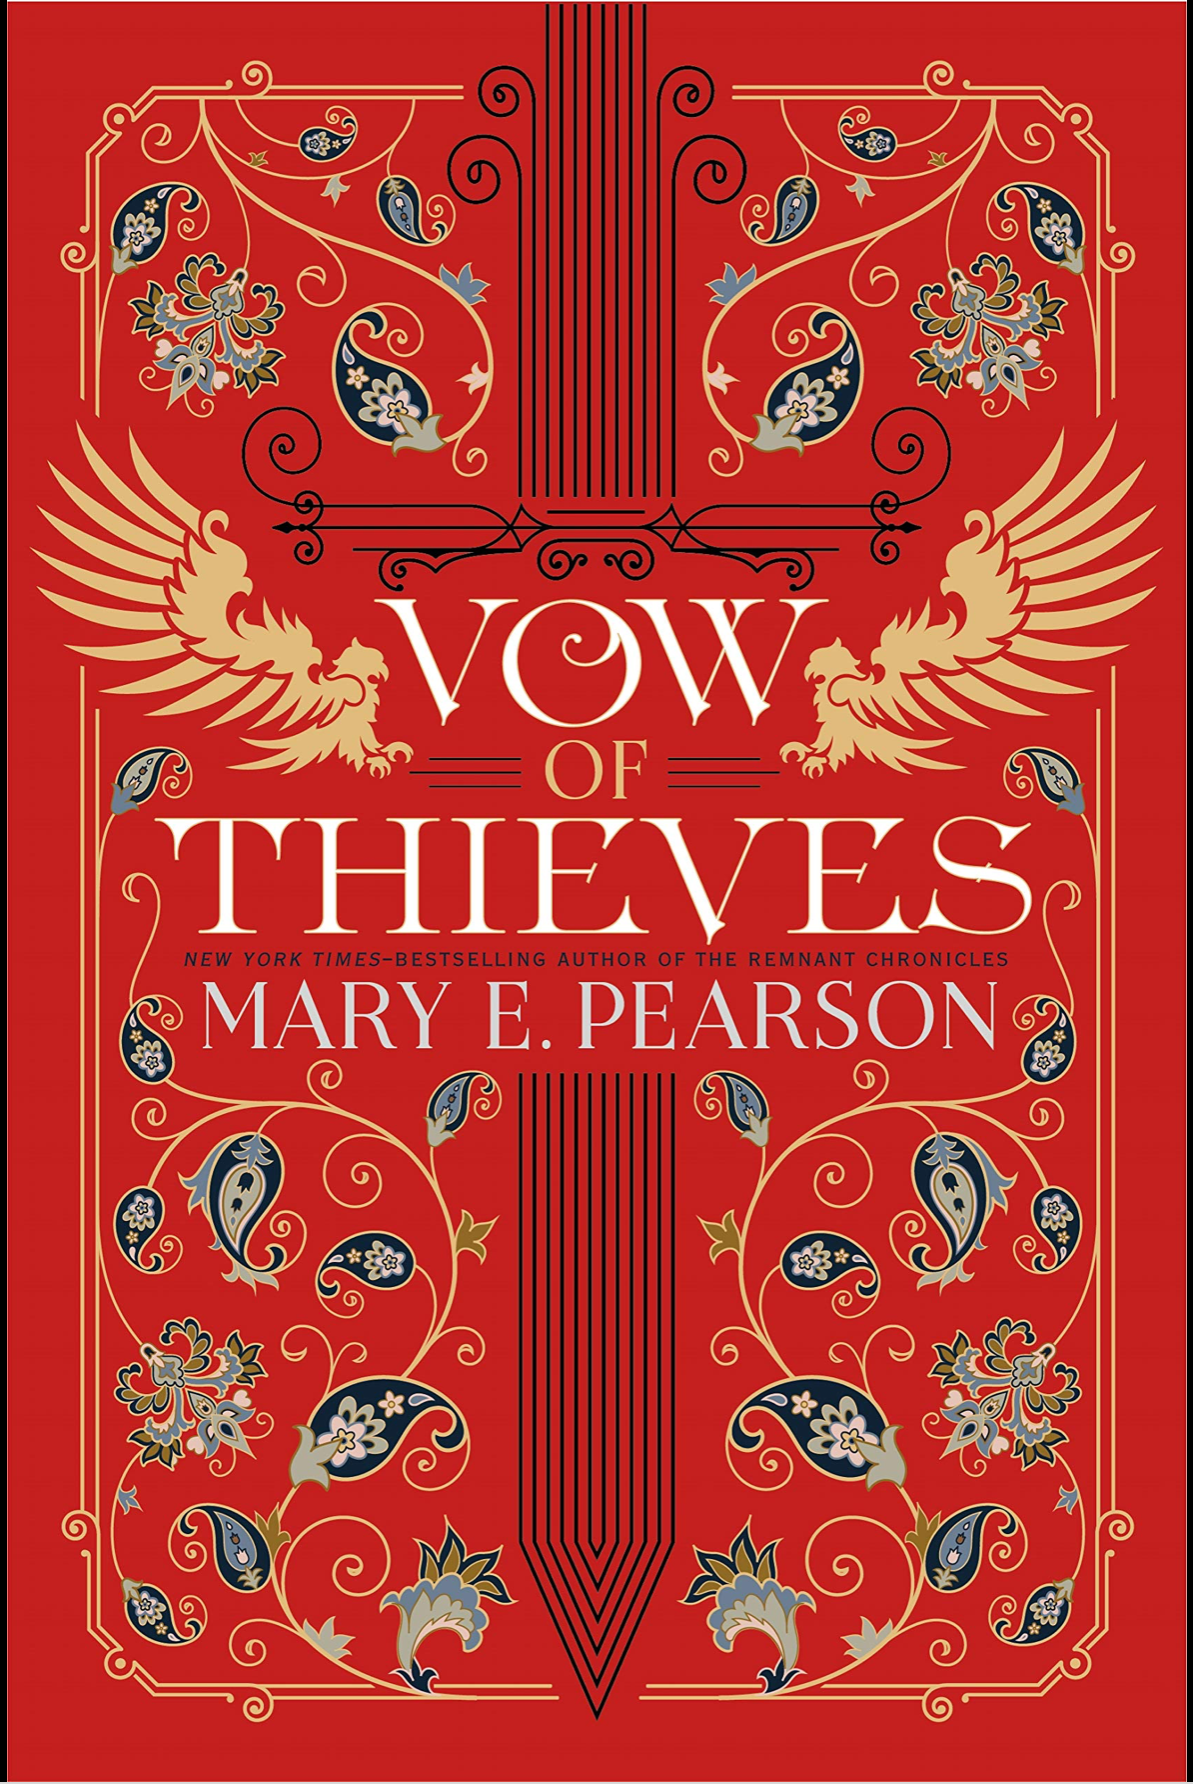 vow of thieves by mary e pearson